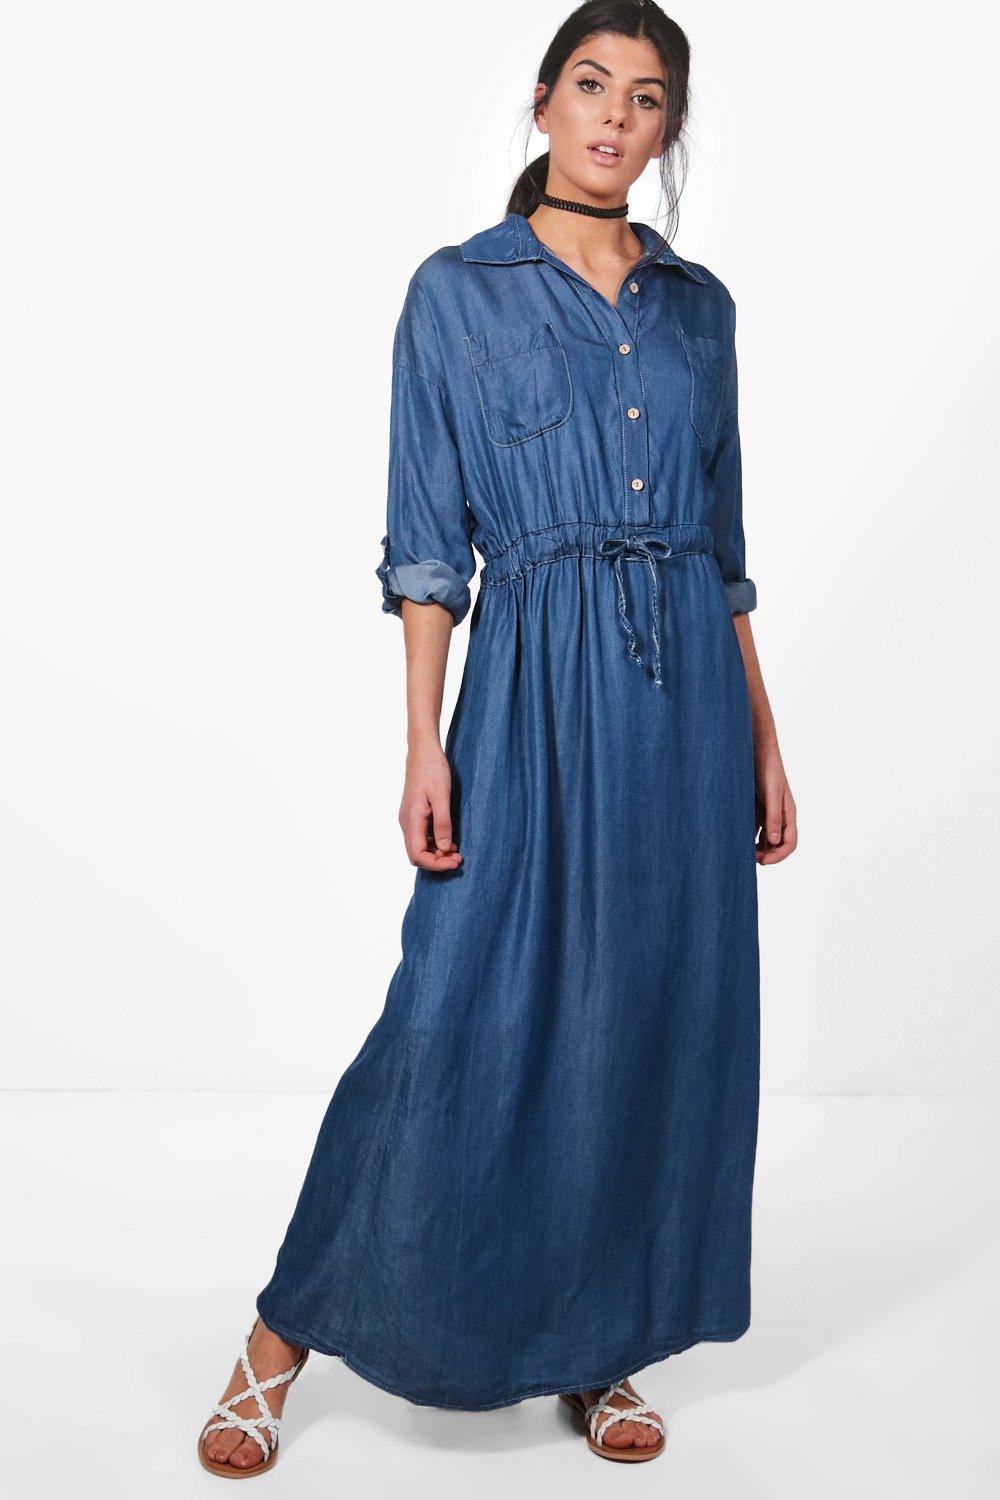 maxi shirt dress with jeans